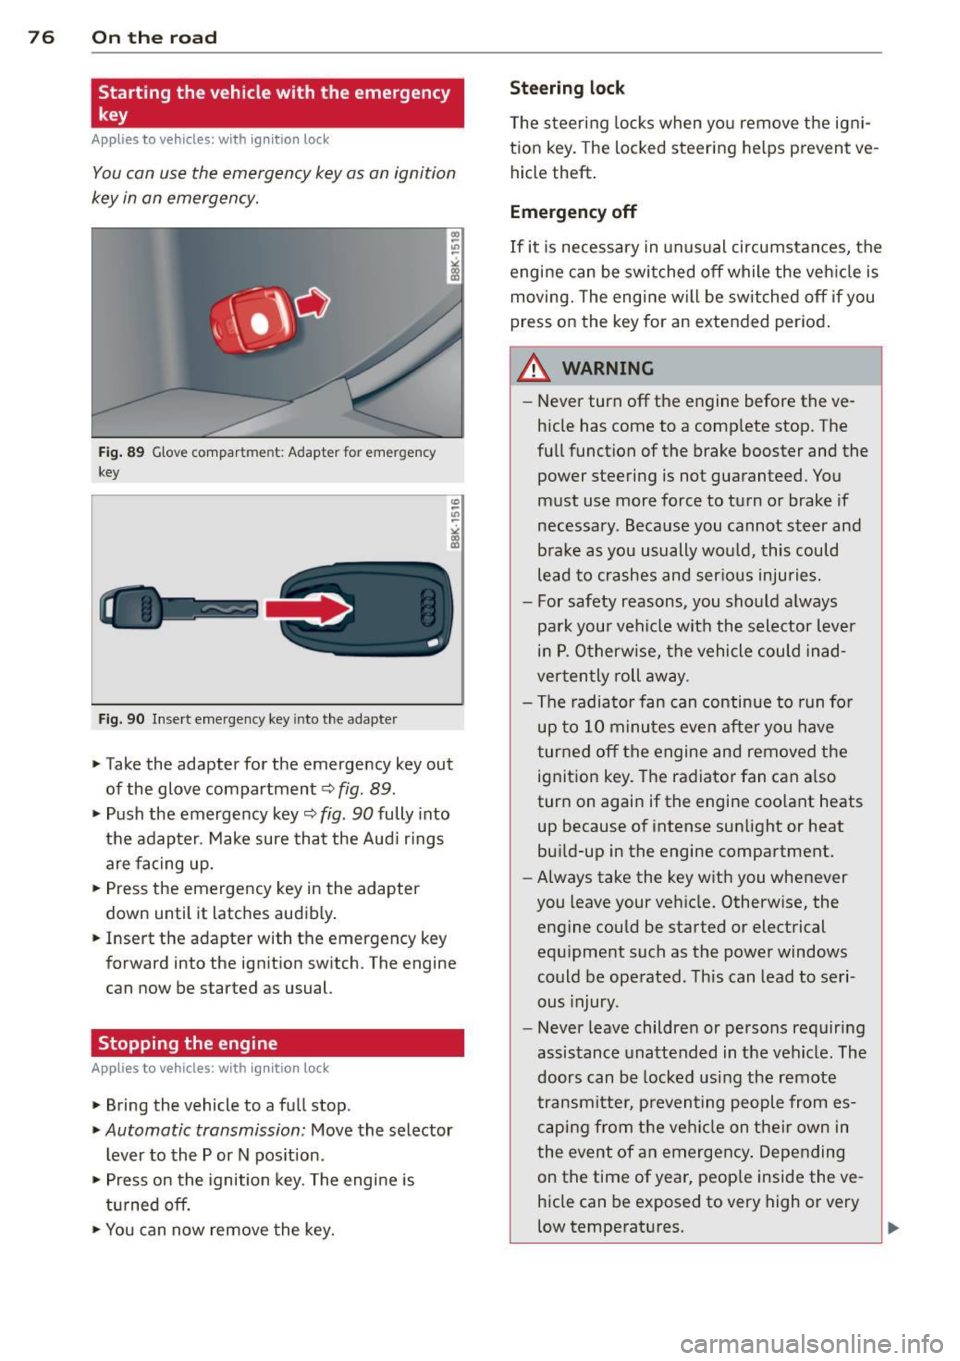 AUDI A5 CABRIOLET 2014  Owners Manual 76  On  the  road 
Starting  the  vehicle  with  the  emergency 
key 
Applies to  vehicles:  with ig ni tion  lock 
You can use  the  emergency  key as  an ignition 
key  in on emergency. 
Fi g.  89 G